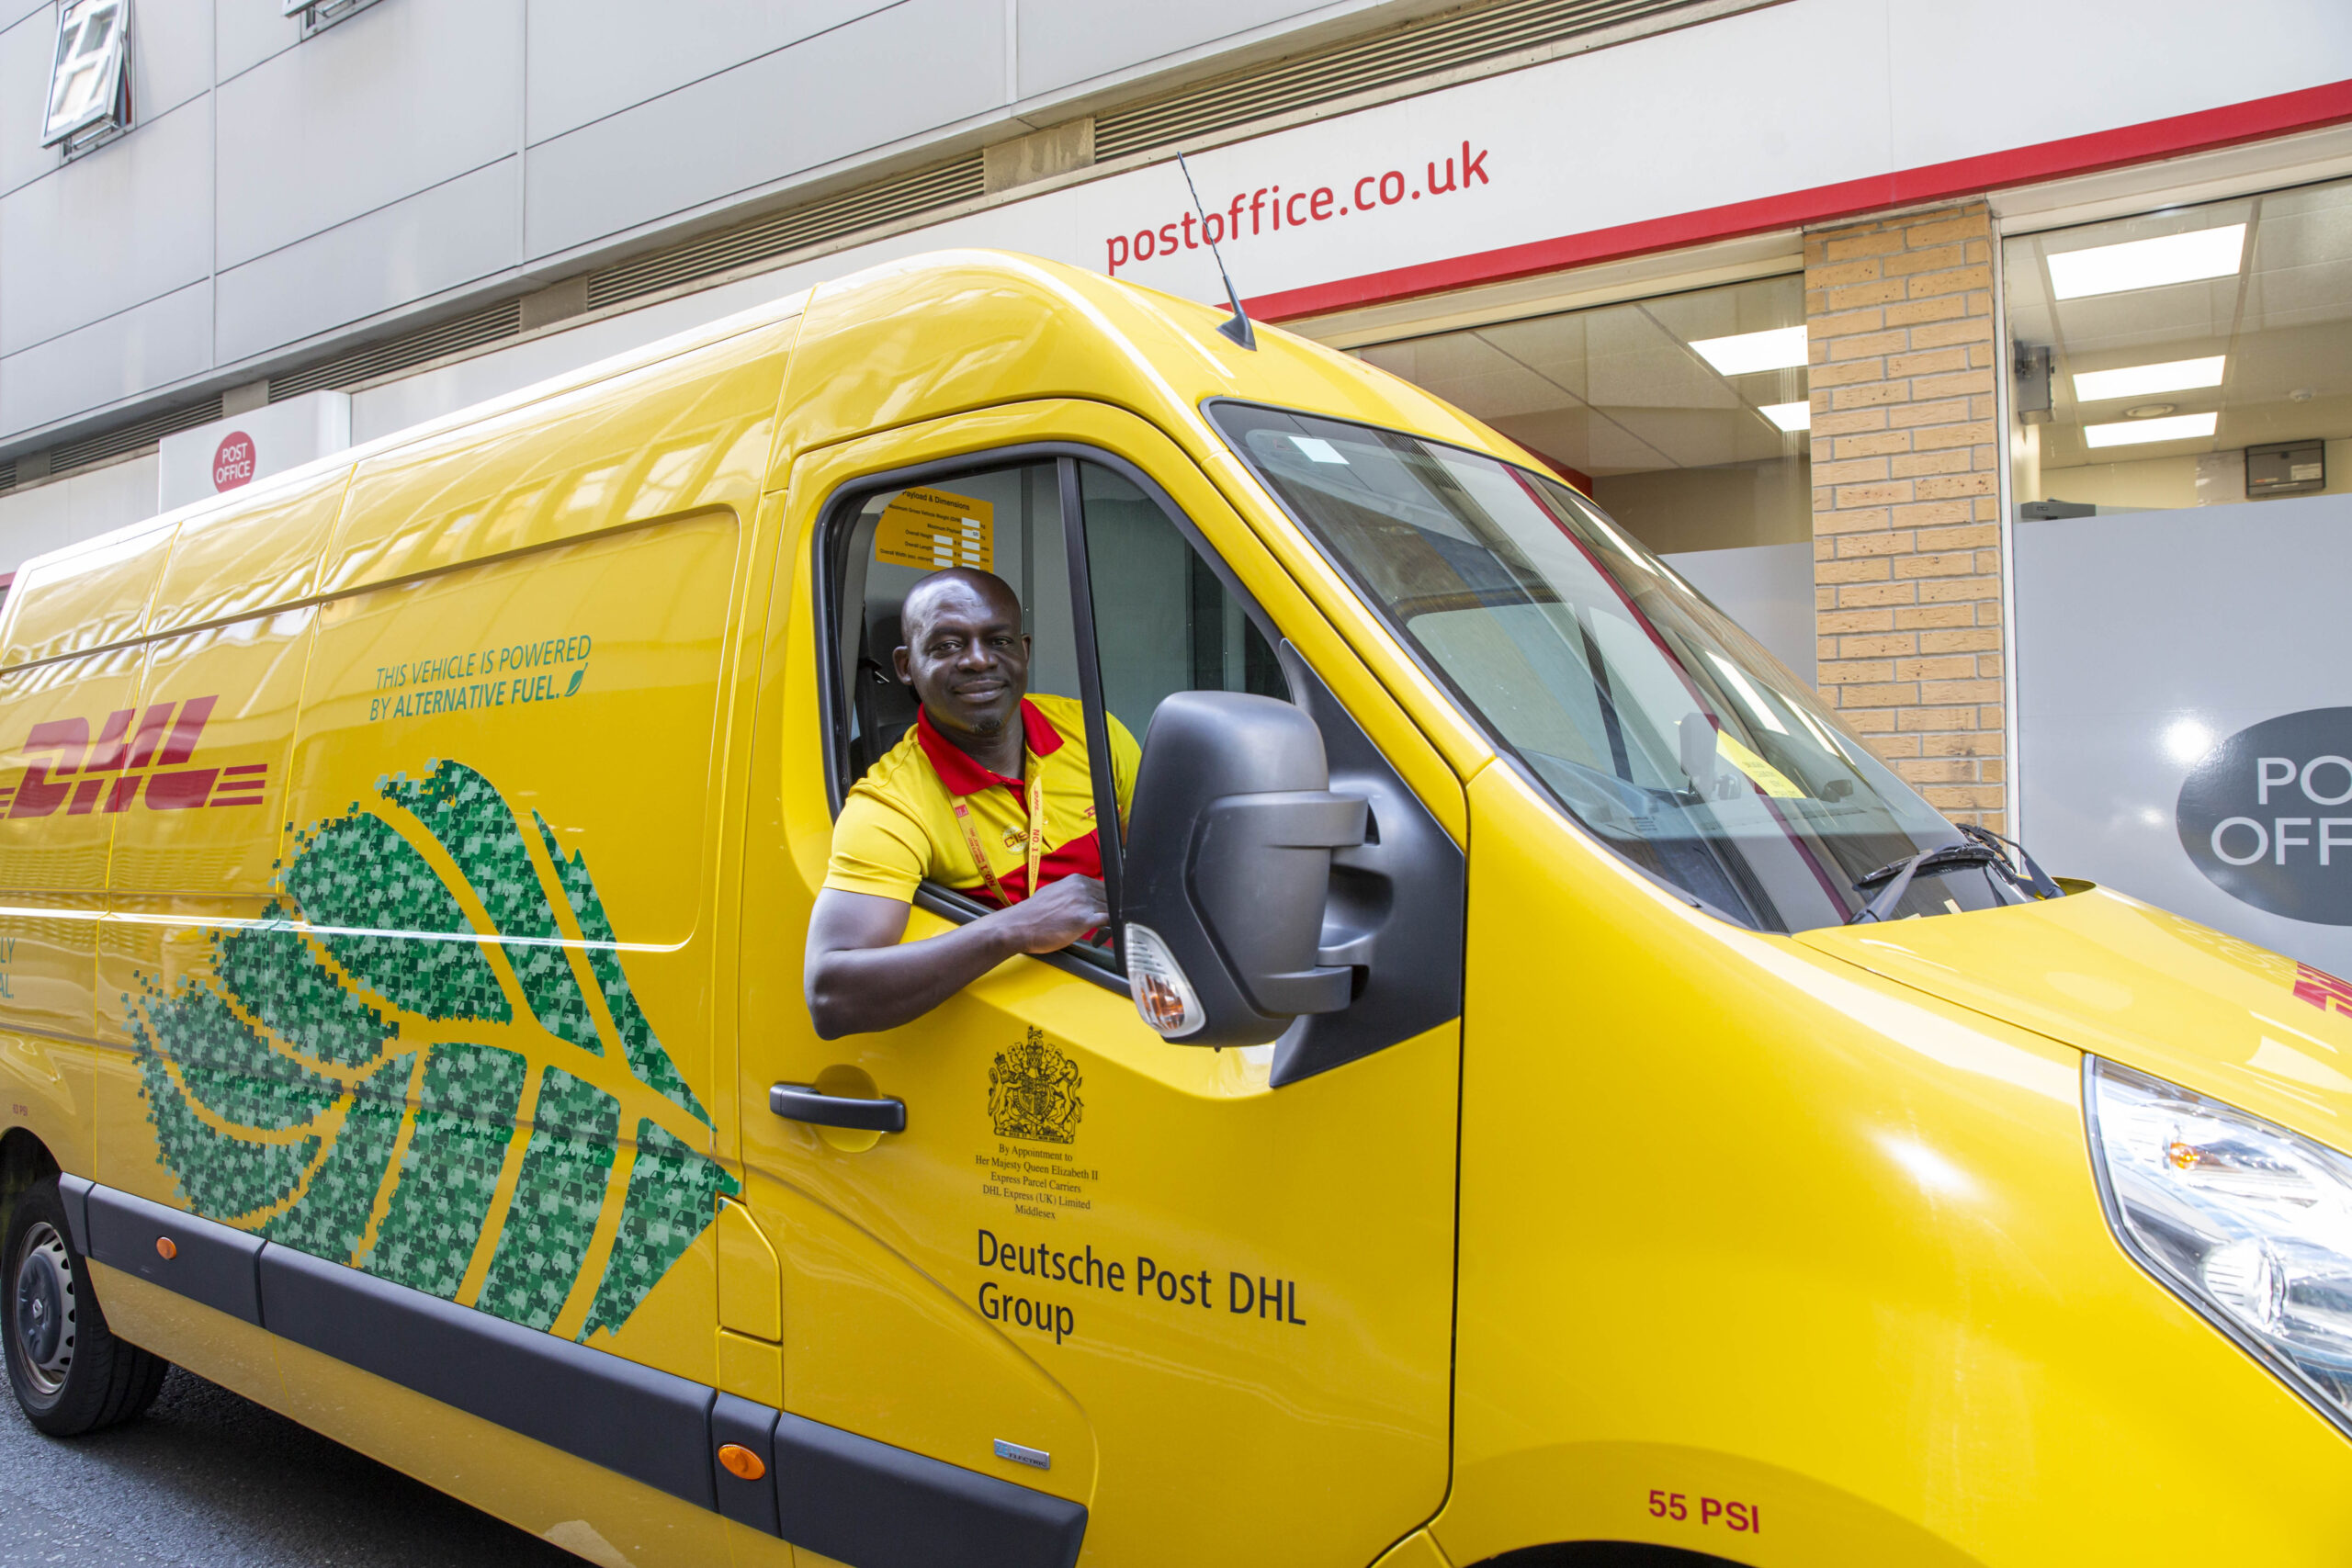 Post Office partners with DHL Express to provide click and collect services